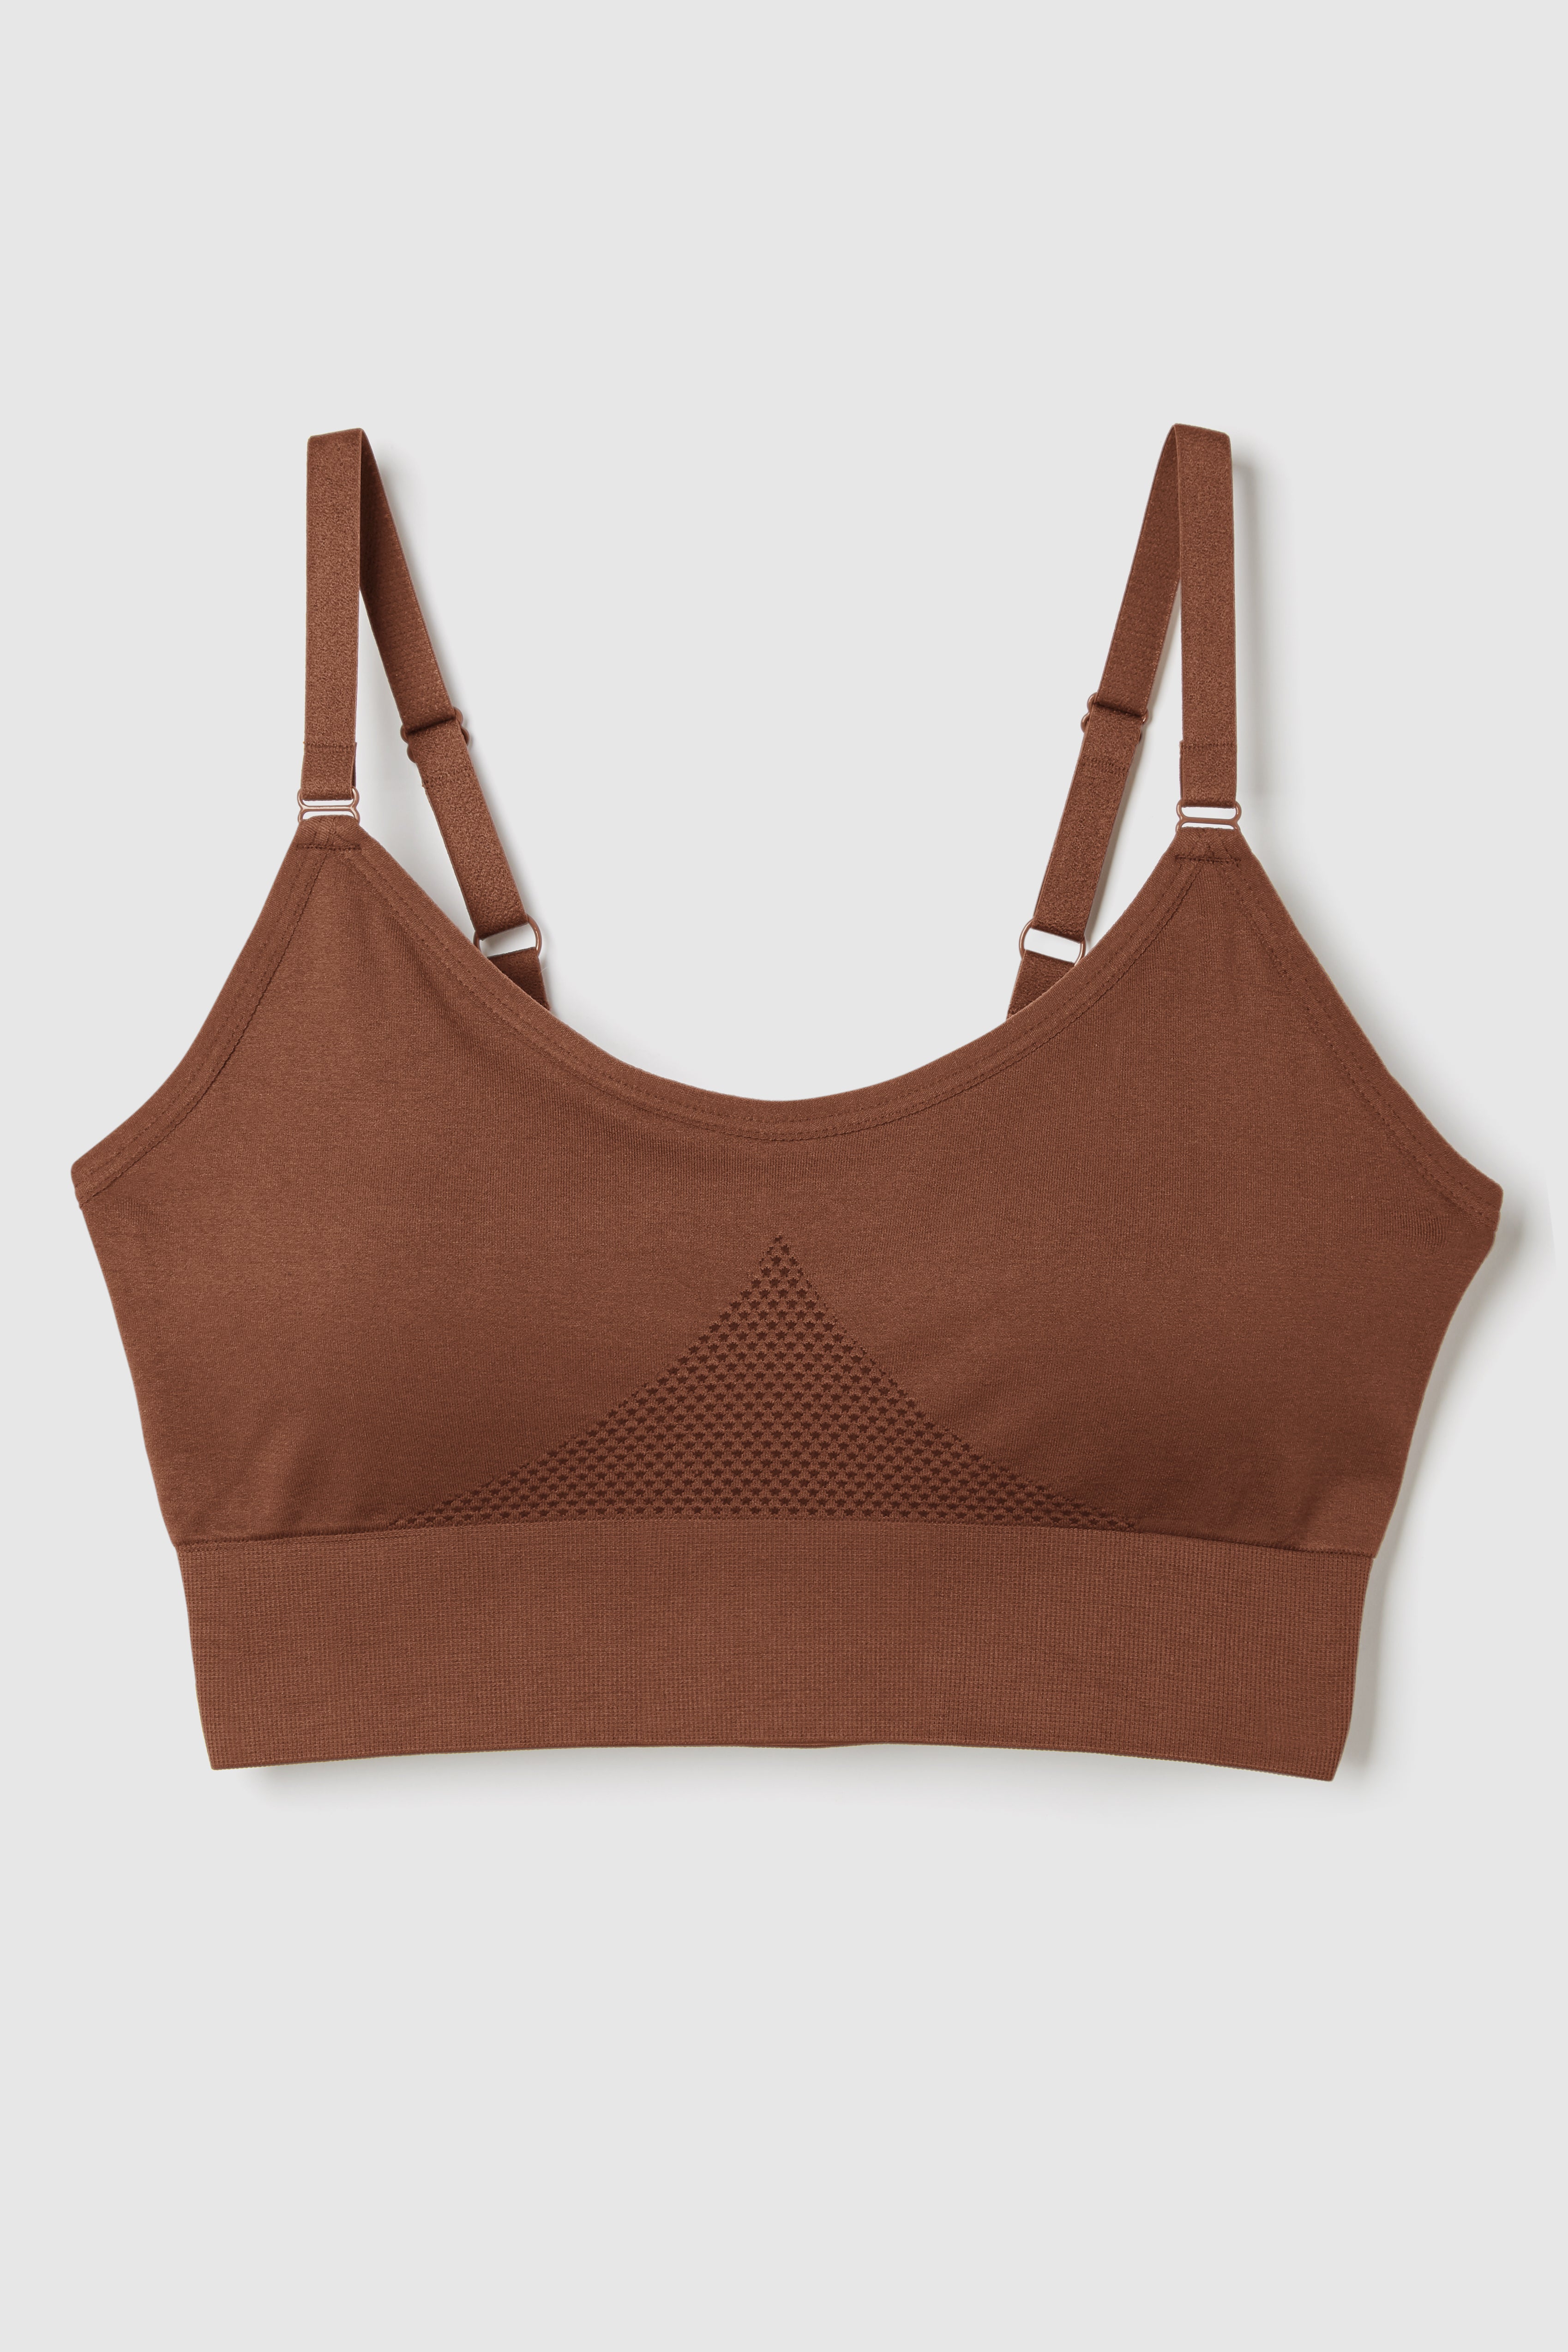 Seamless Underwire Front Close Longline Sports Bra Racerback For Women Non  Padded, Plus Size 32 42 B F Style 210623 From Dou01, $12.52